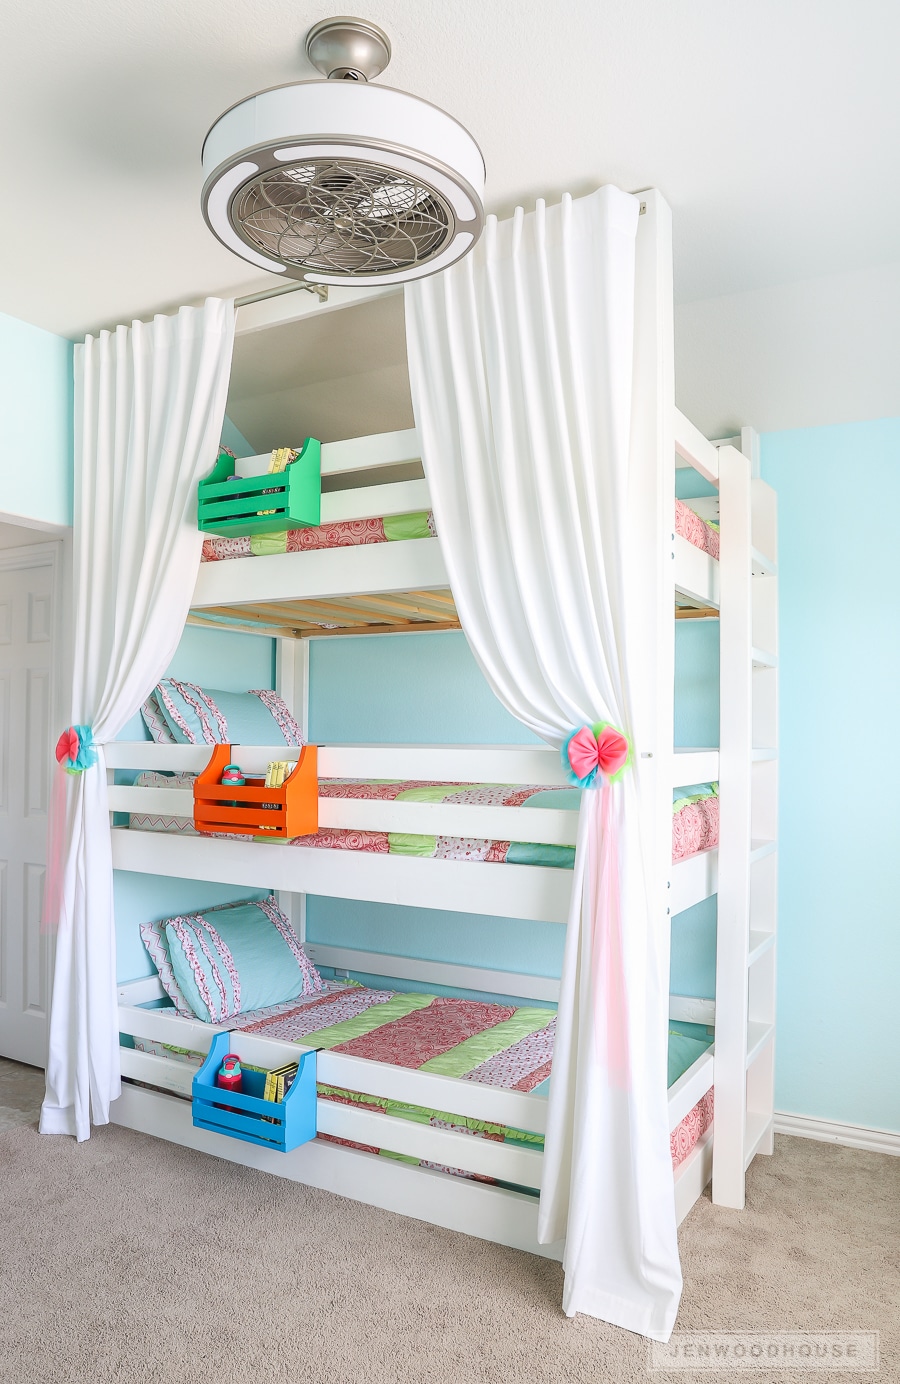 How To Build A Diy Triple Bunk Bed, How Much Does It Cost To Make A Loft Bed